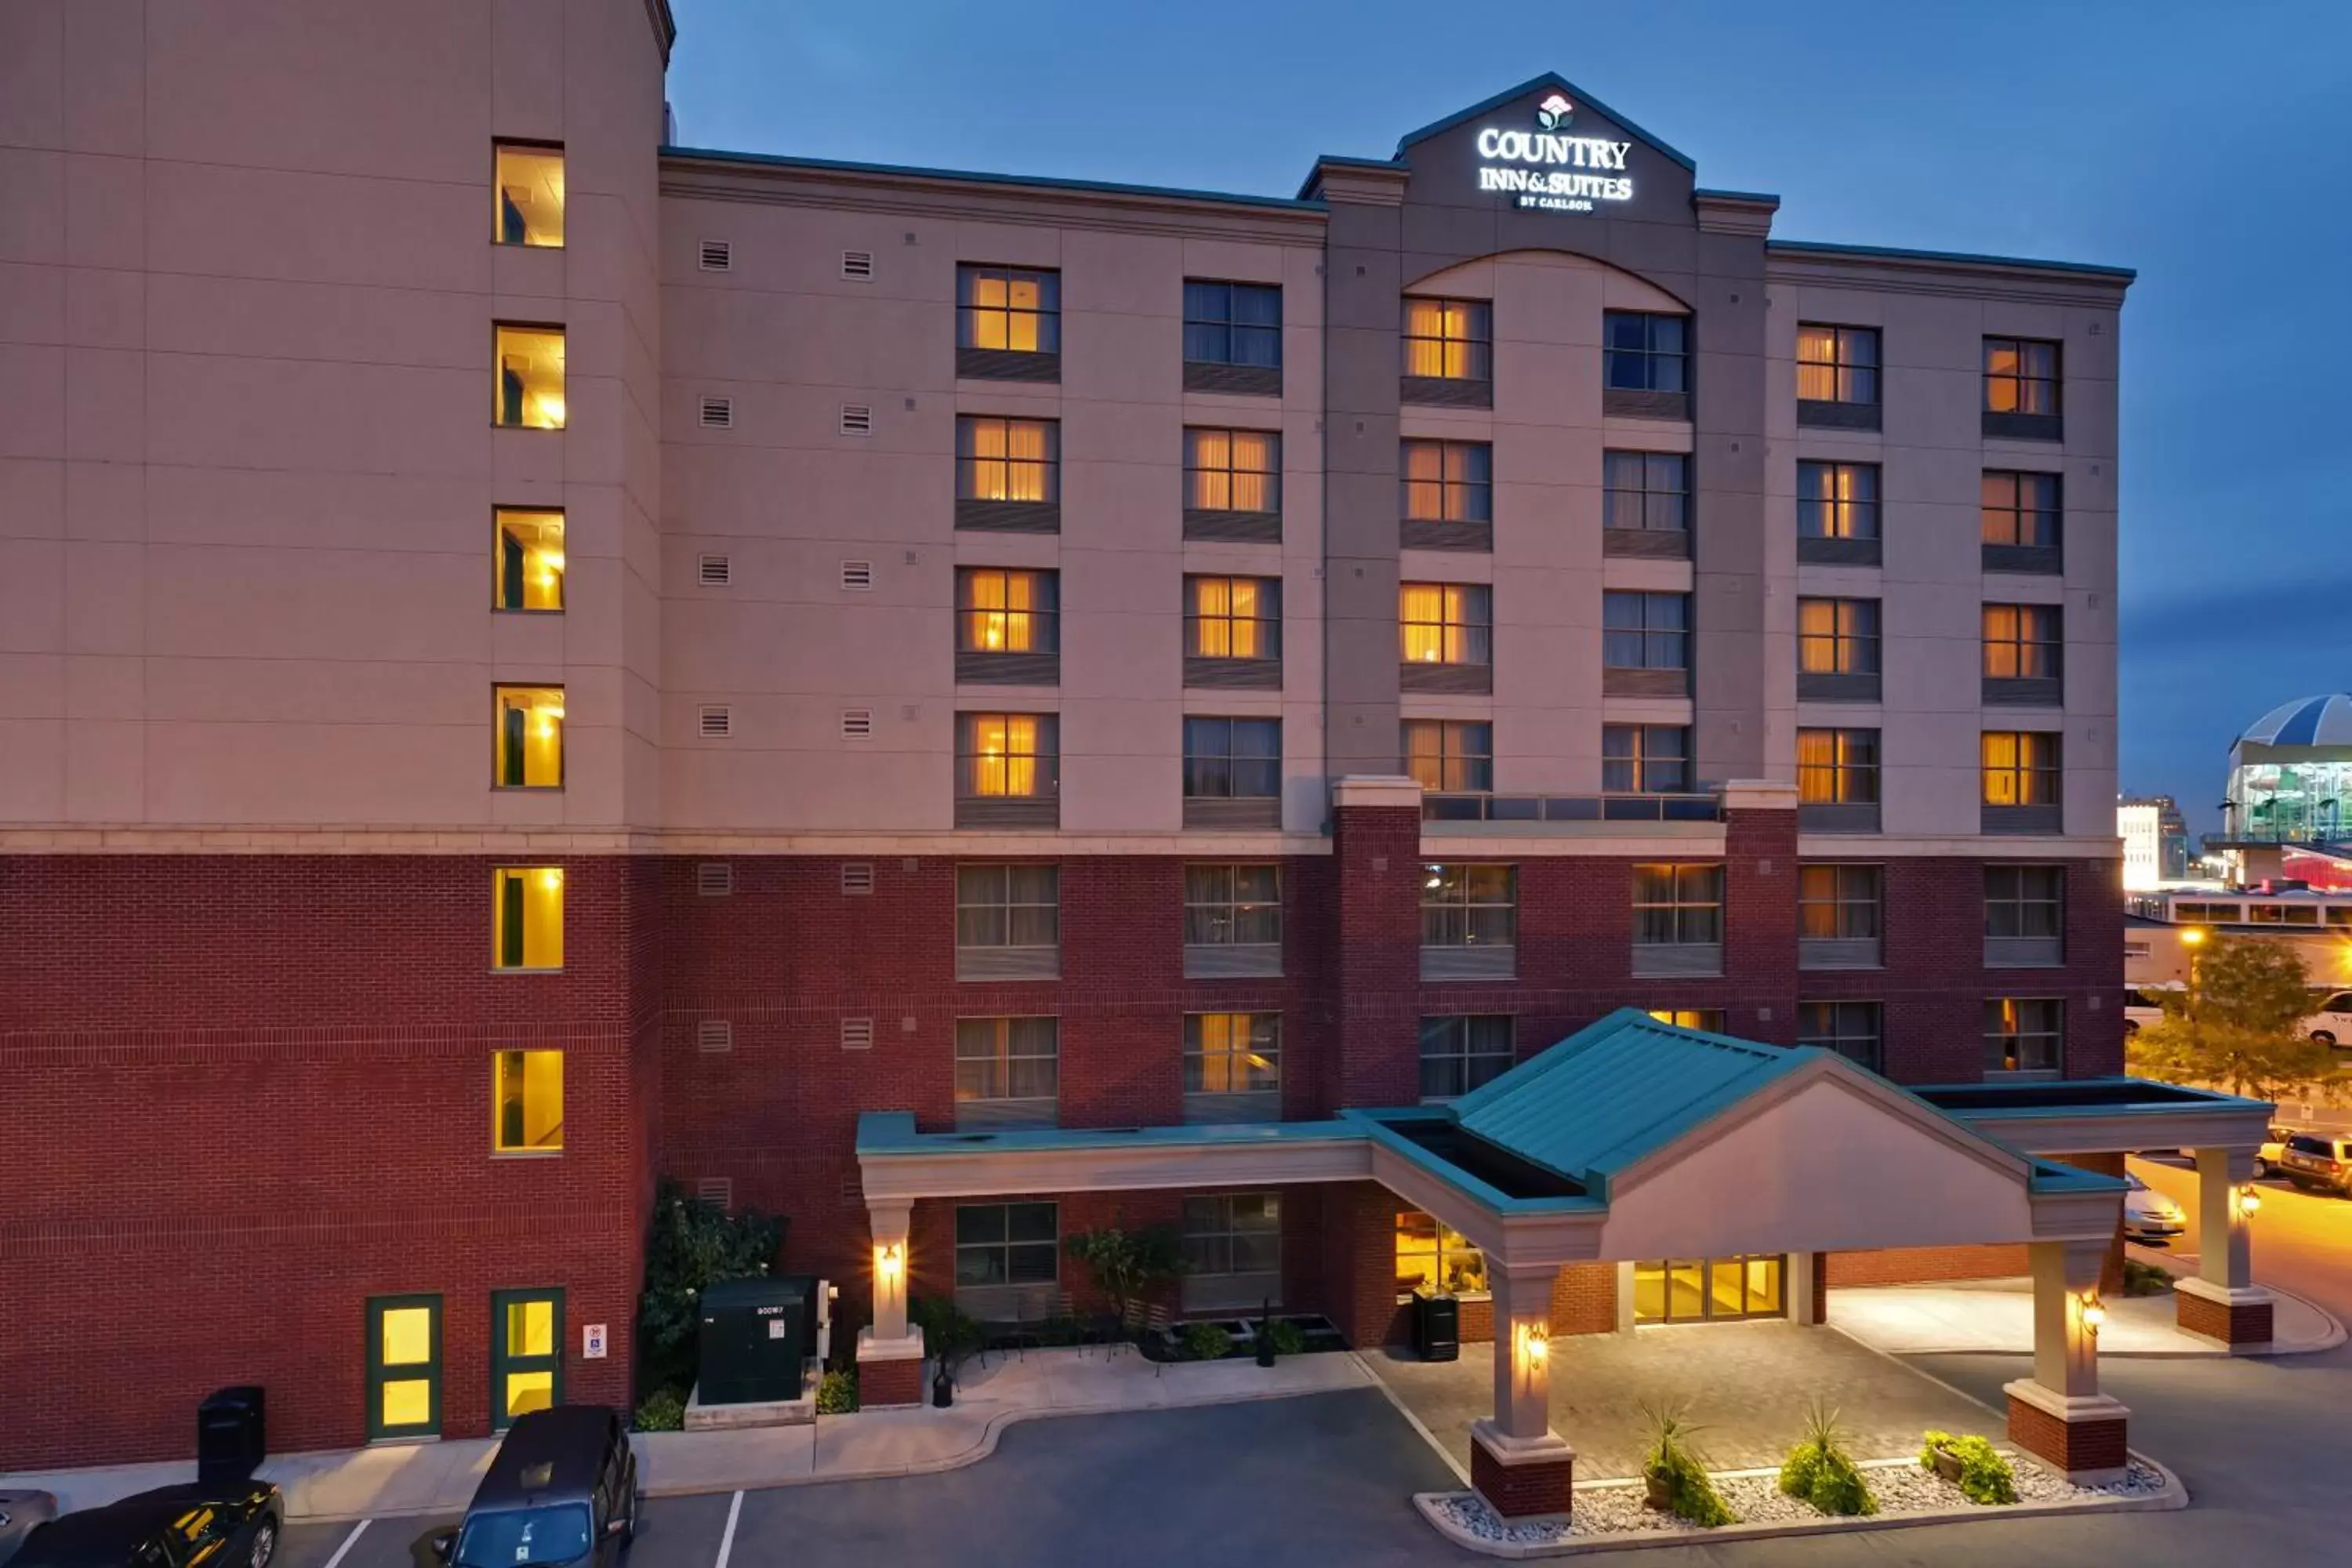 Facade/entrance, Property Building in Country Inn & Suites by Radisson, Niagara Falls, ON